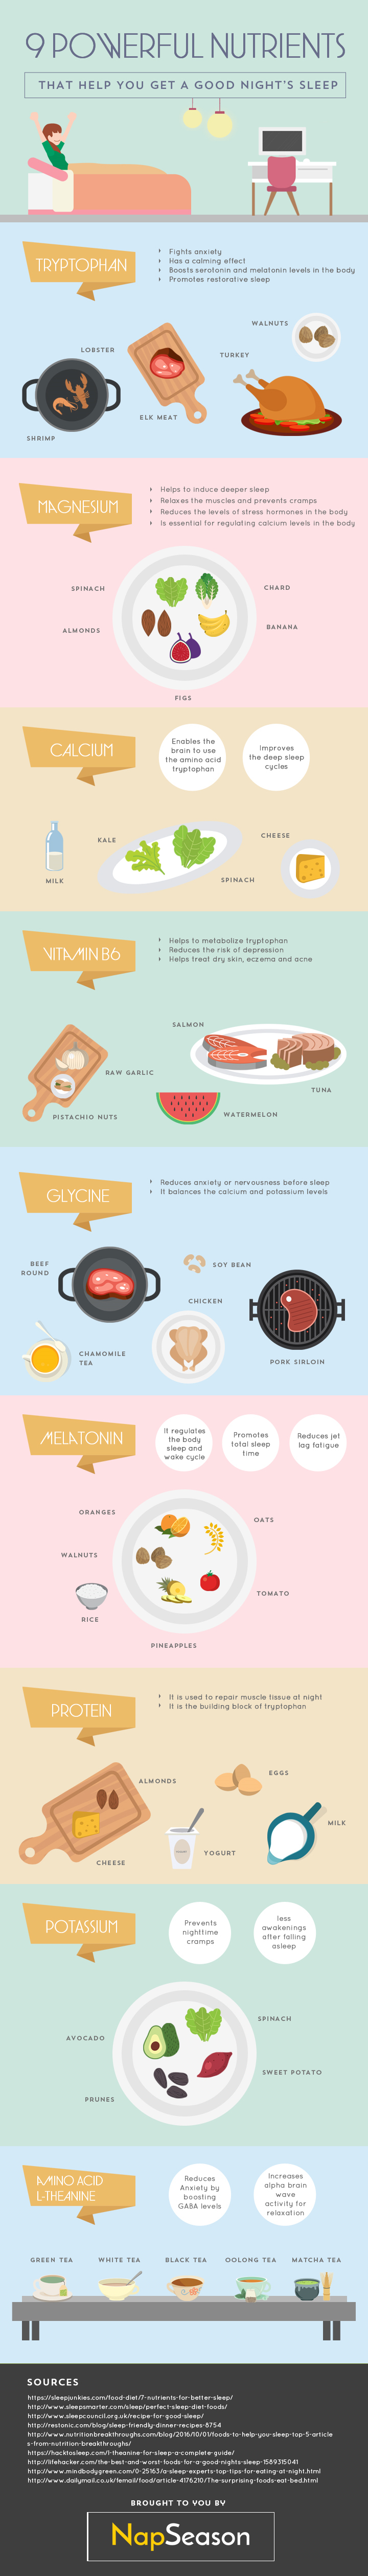 An infographic showing the different nutrients for a good night's sleep, including tryptophan, magnesium, calcium & Vitamin B6.